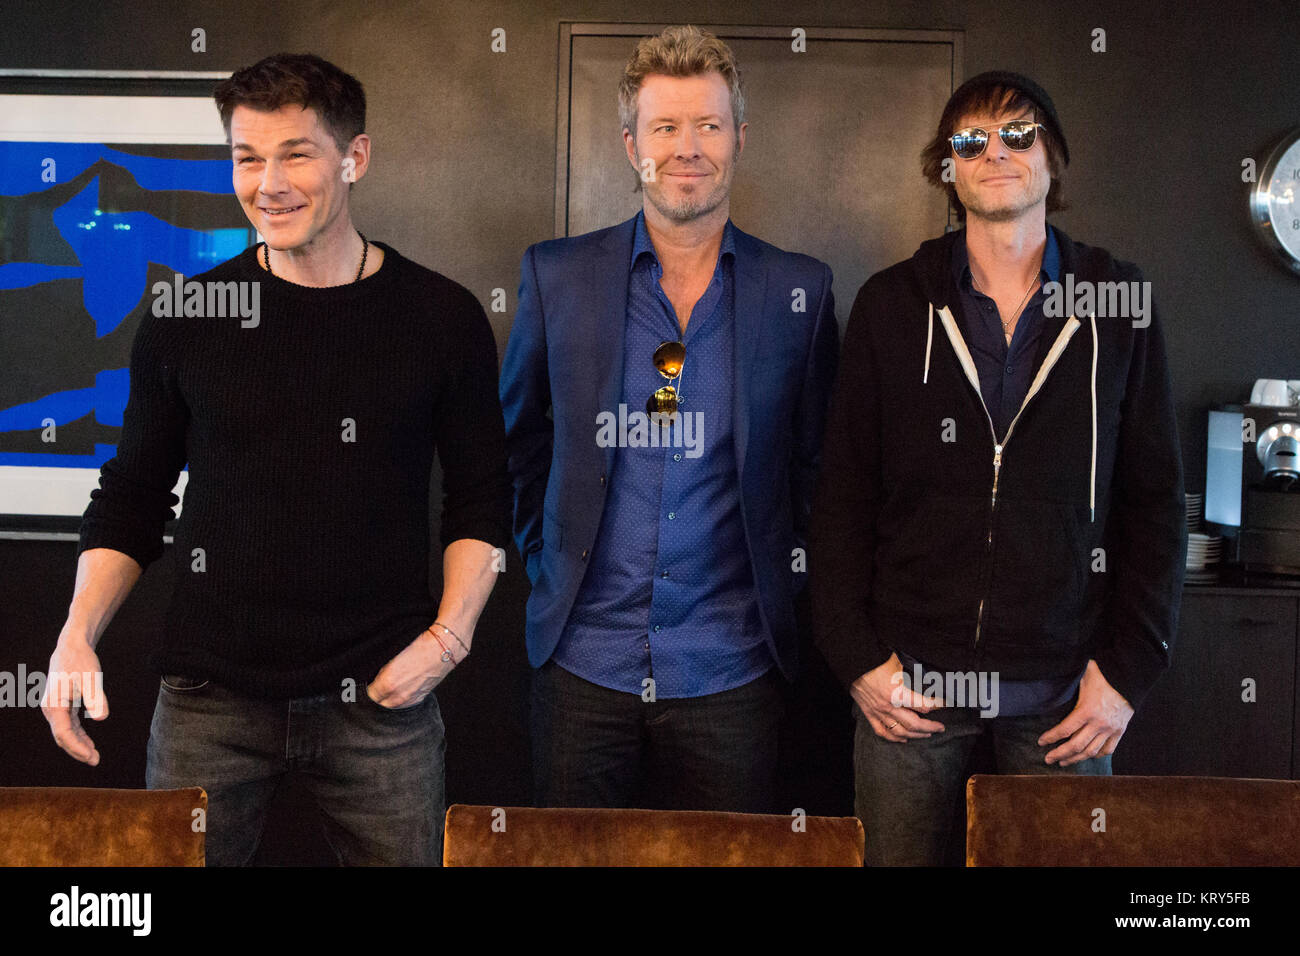 The Norwegian pop-rock group A-ha holds a press conference at The Thief in  Oslo. The group consists of Morten Harket (L), Magne Furuholmen (C) and  Paul Waaktaar-Savoy (R). Norway, 29/04 2016 Stock